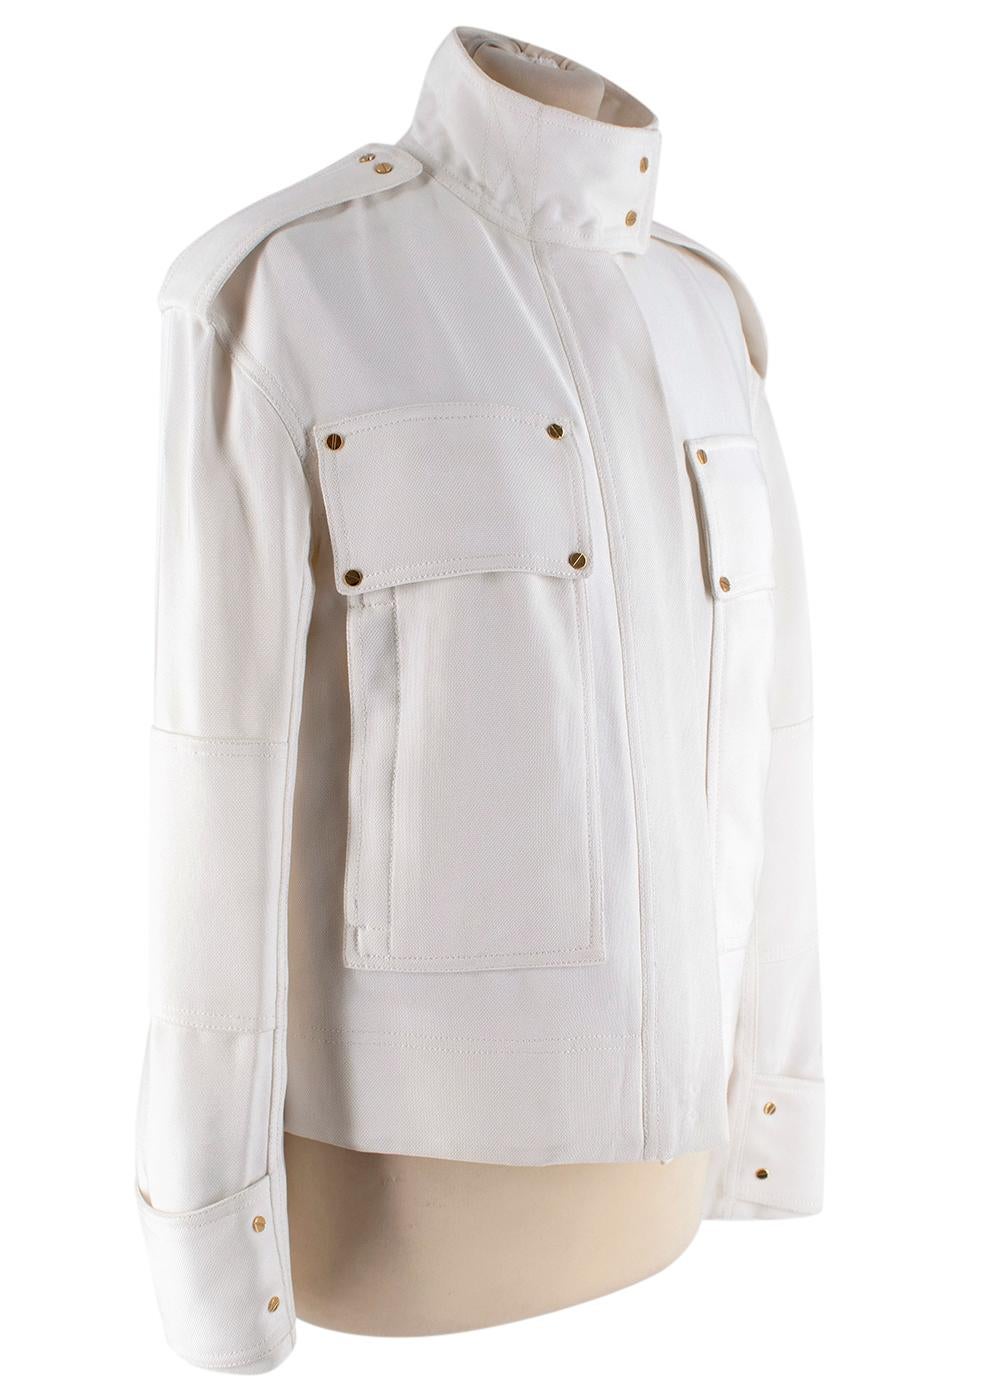 Tom Ford Ivory Military Jacket

- Two pockets on the front 
- Gold tone zips and buttons
- Button Up Collar
- Silk Lining

Measurements are taken with the item lying flat, seam to seam.
Height - 56cm
Width - 44.5cm